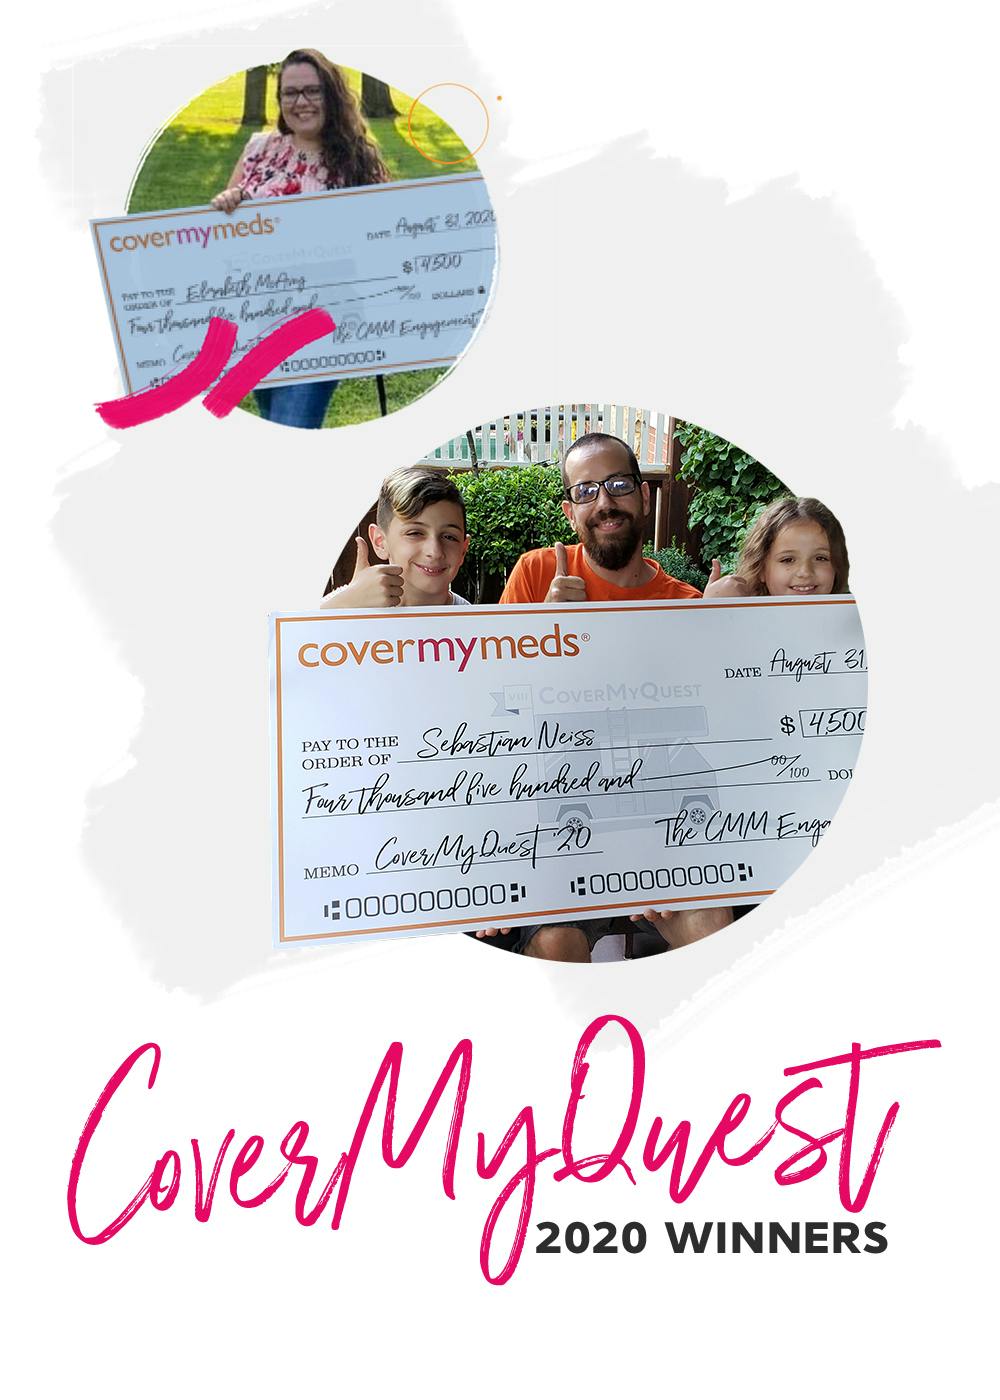 CoverMyMeds' CoverMyQuest 2020 winners update